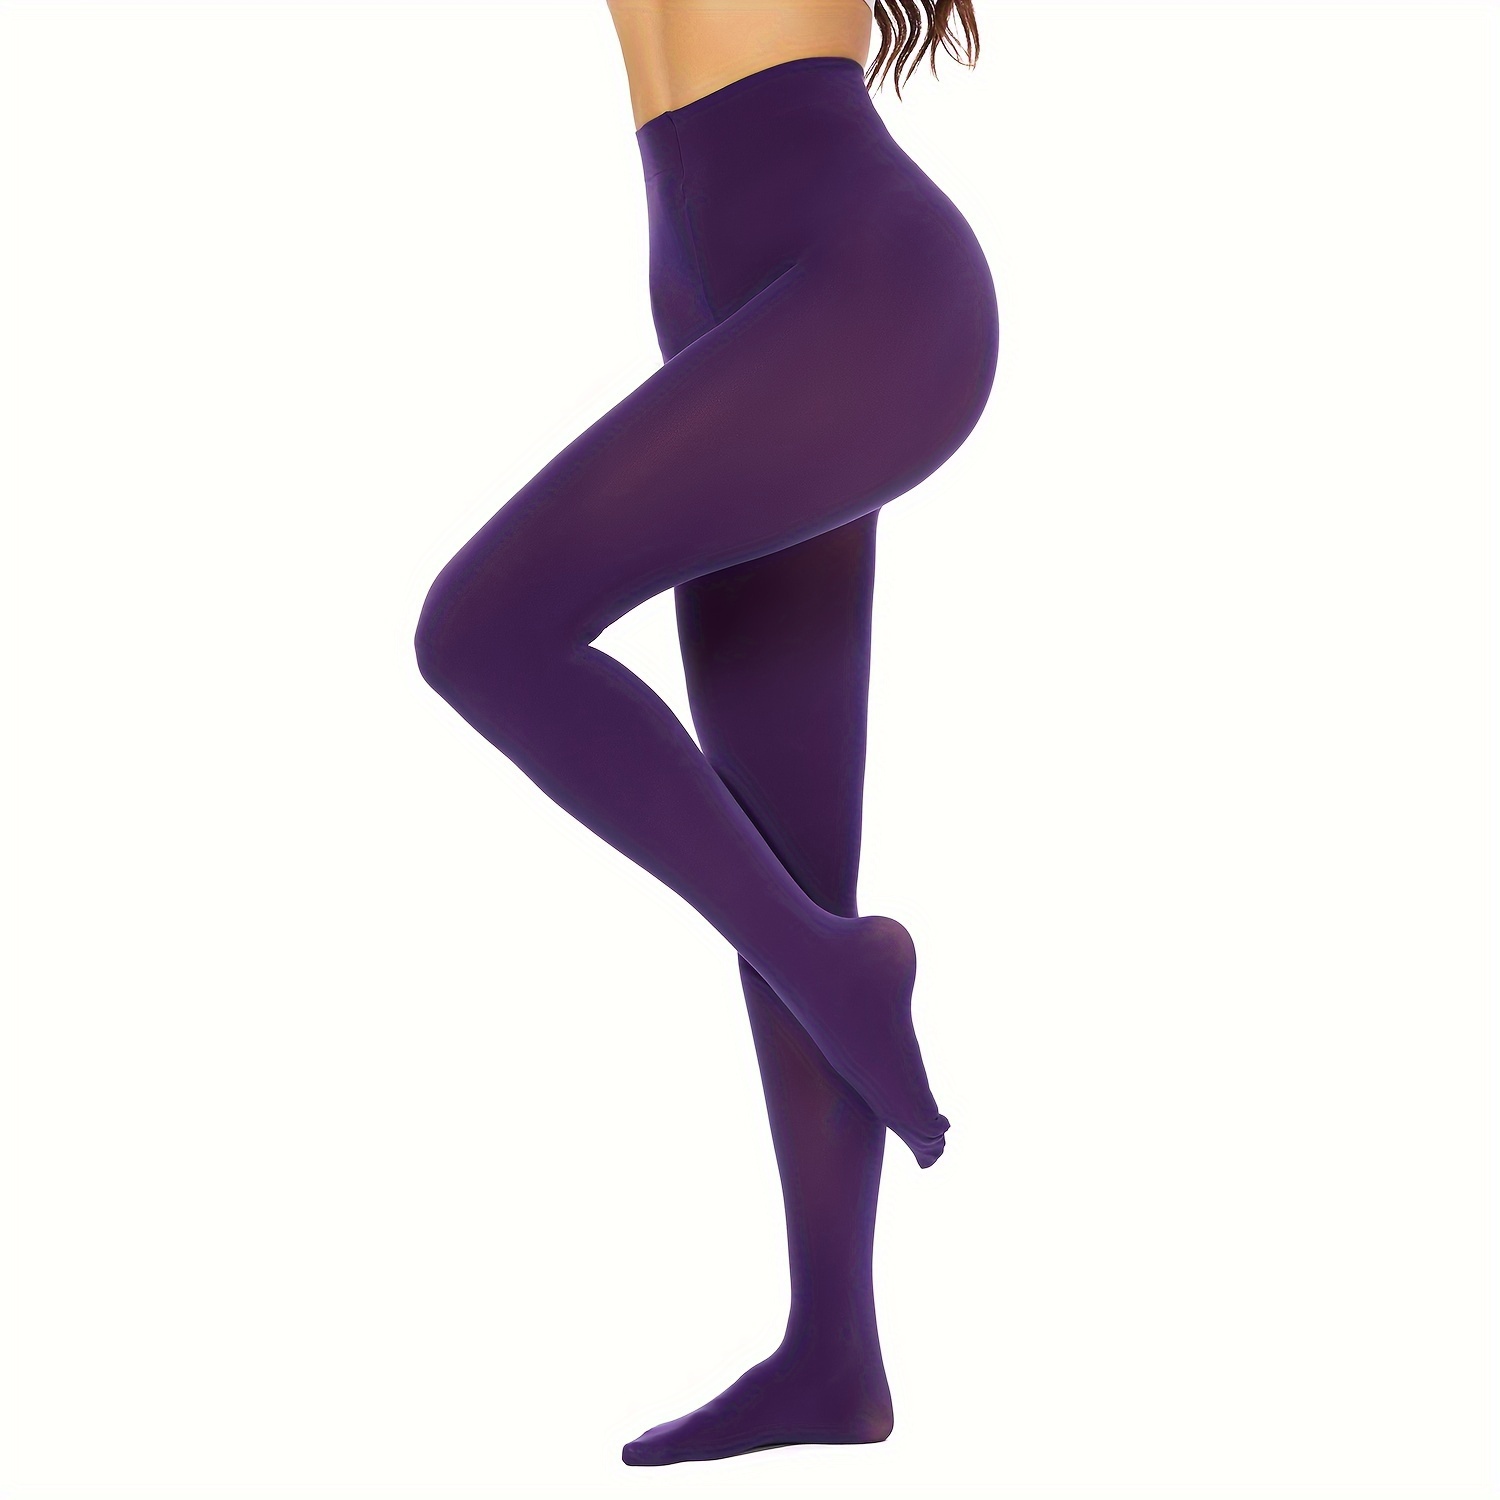 colored tights  Purple tights outfit, Colored tights outfit, Stockings  outfit